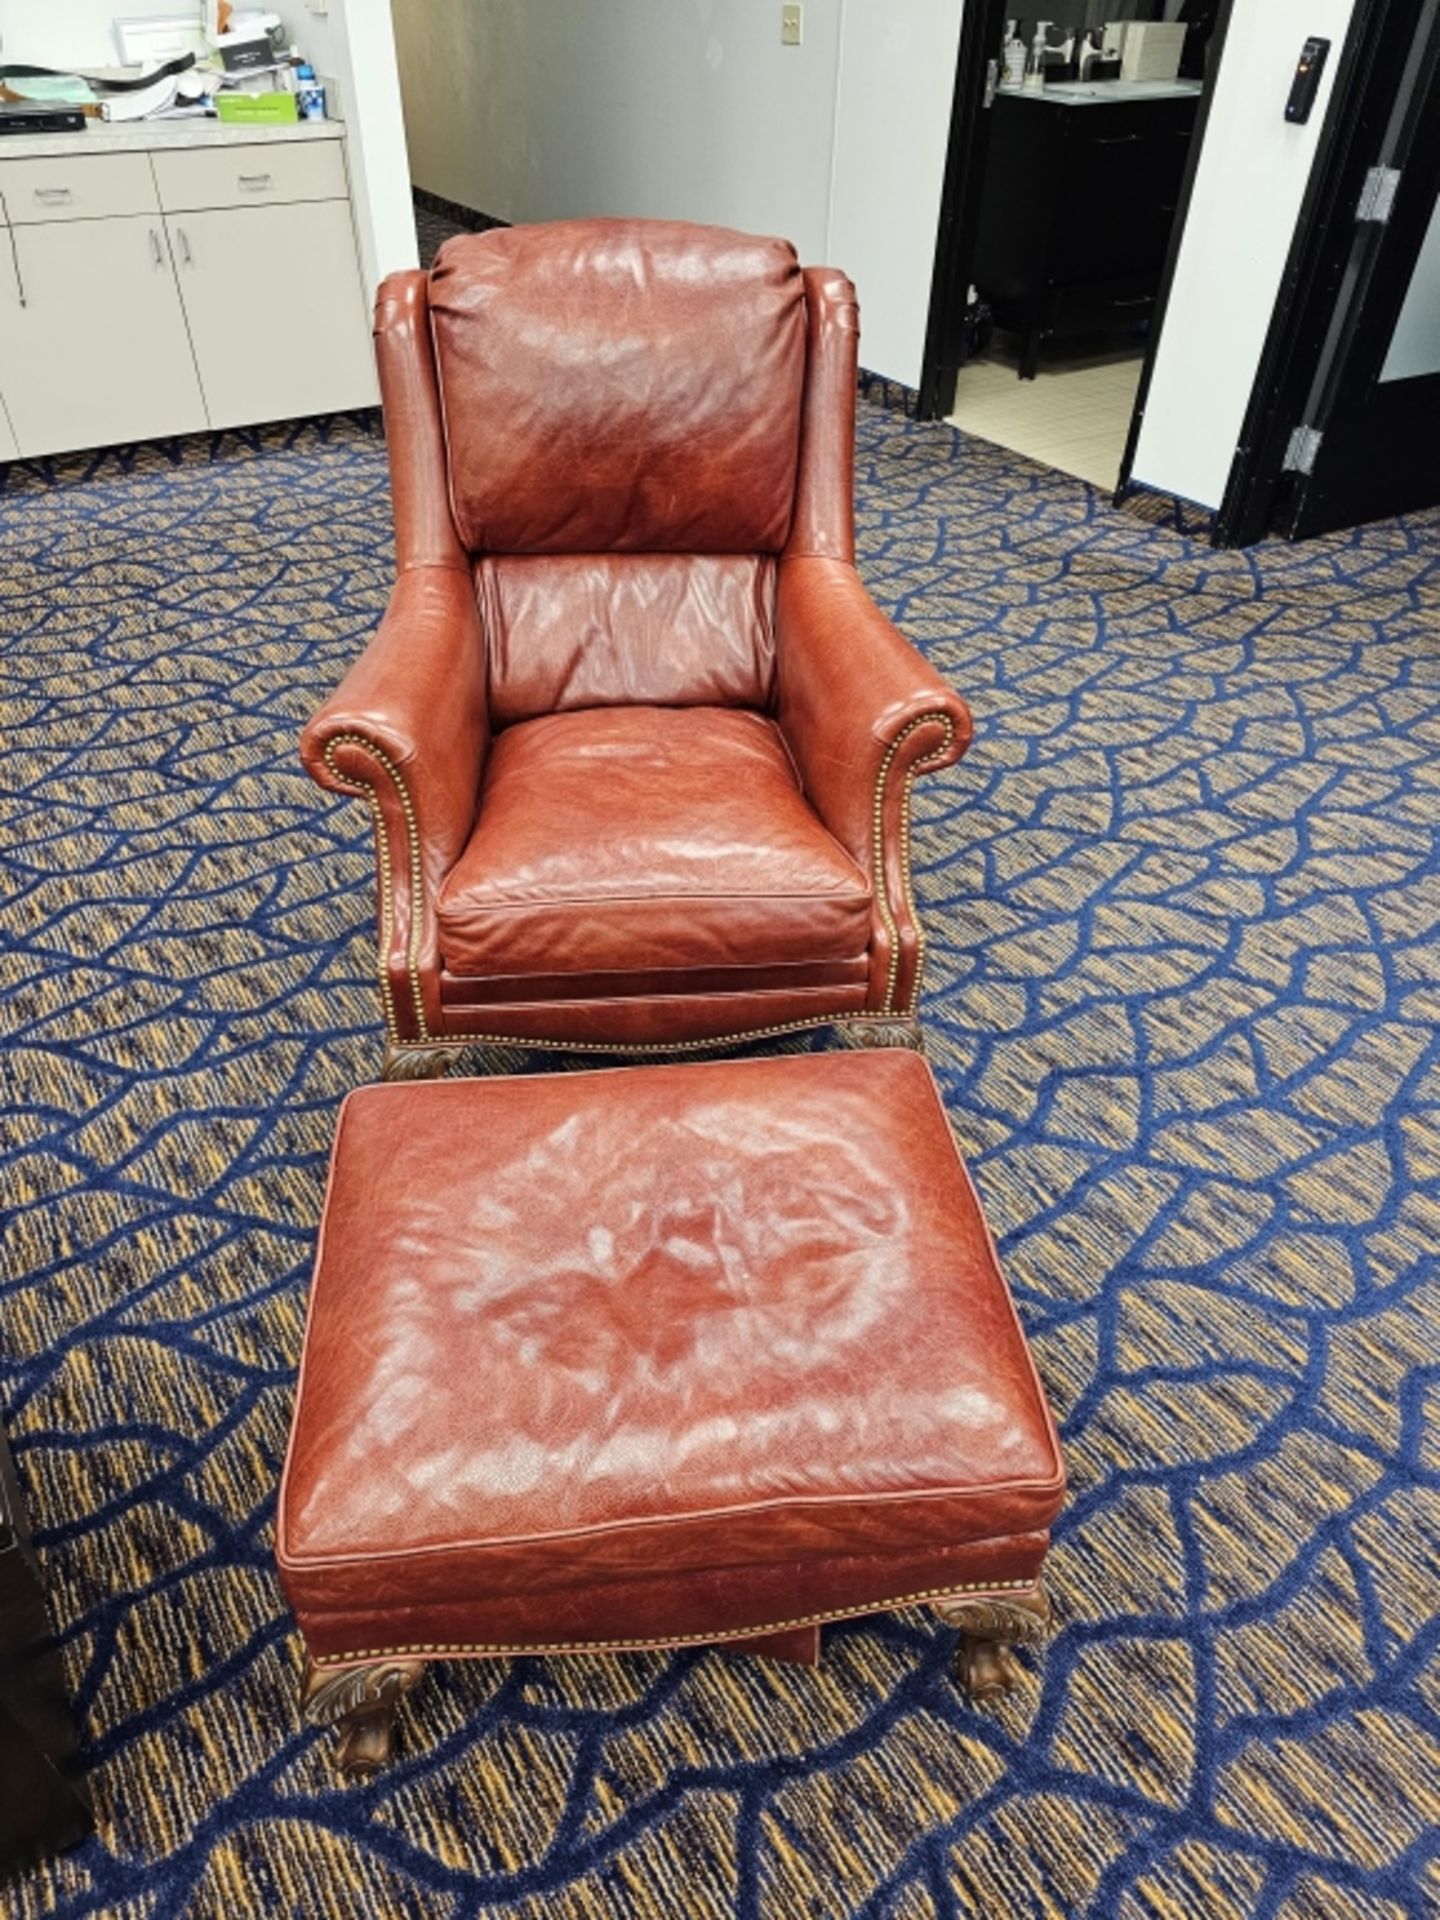 (2) Robb & Stucky Leather Chairs With Foot Stools - Image 3 of 11